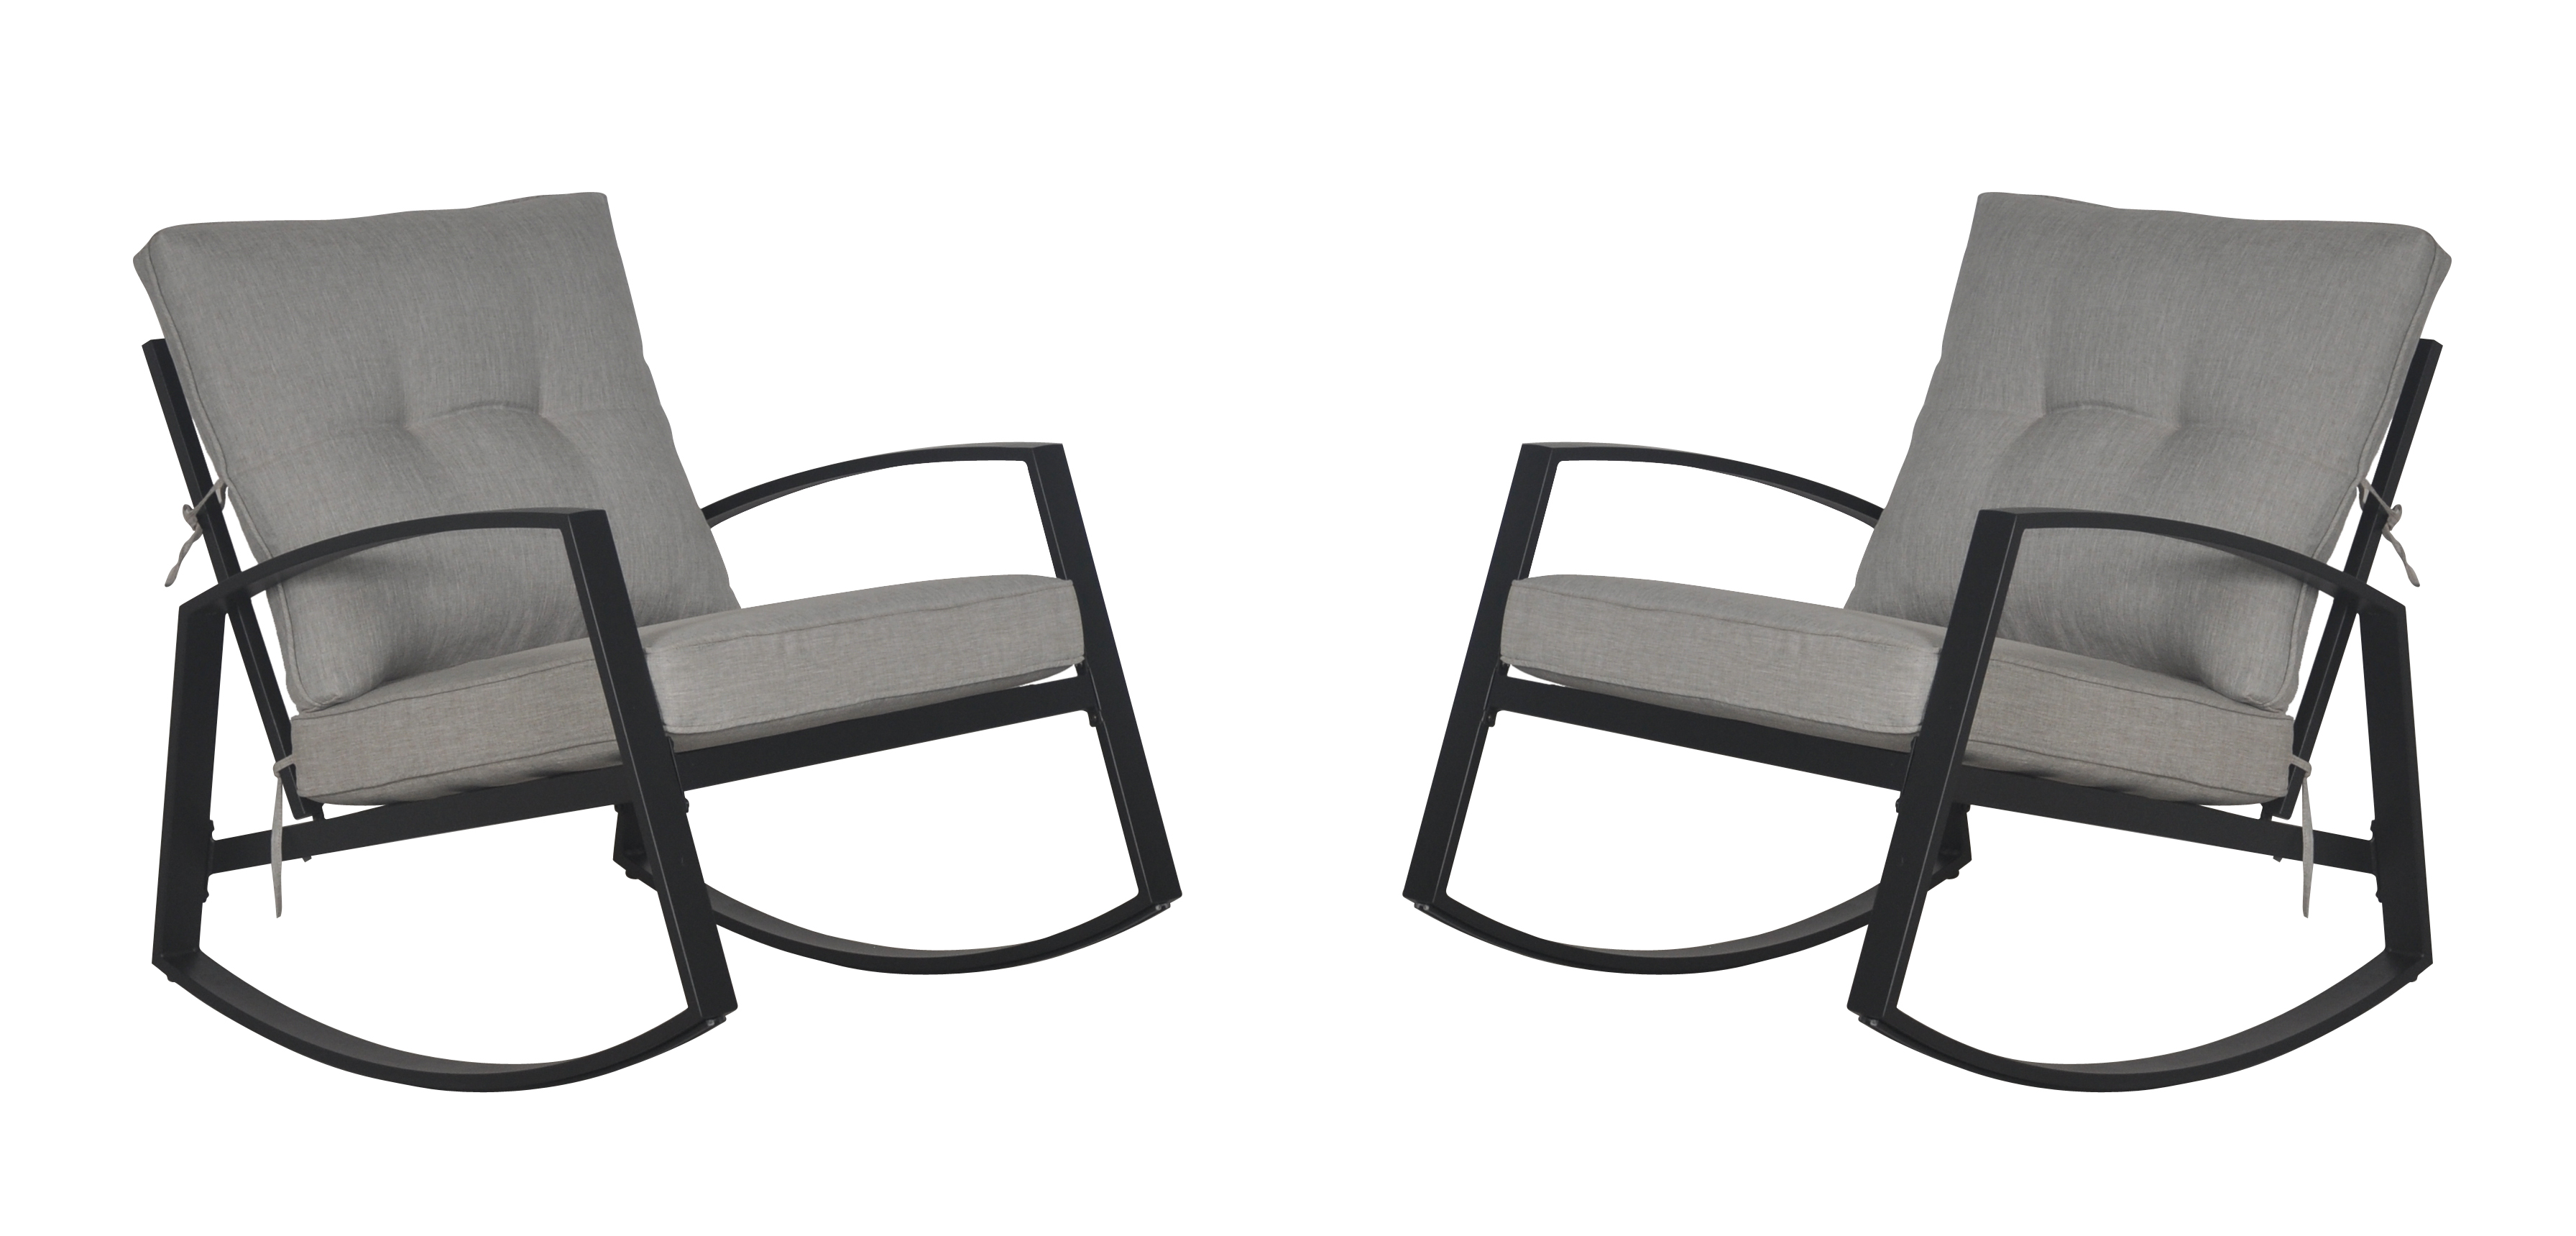 Mainstays Asher Springs 2-Piece Outdoor Furniture Patio Rocker Set -Grey - image 2 of 8